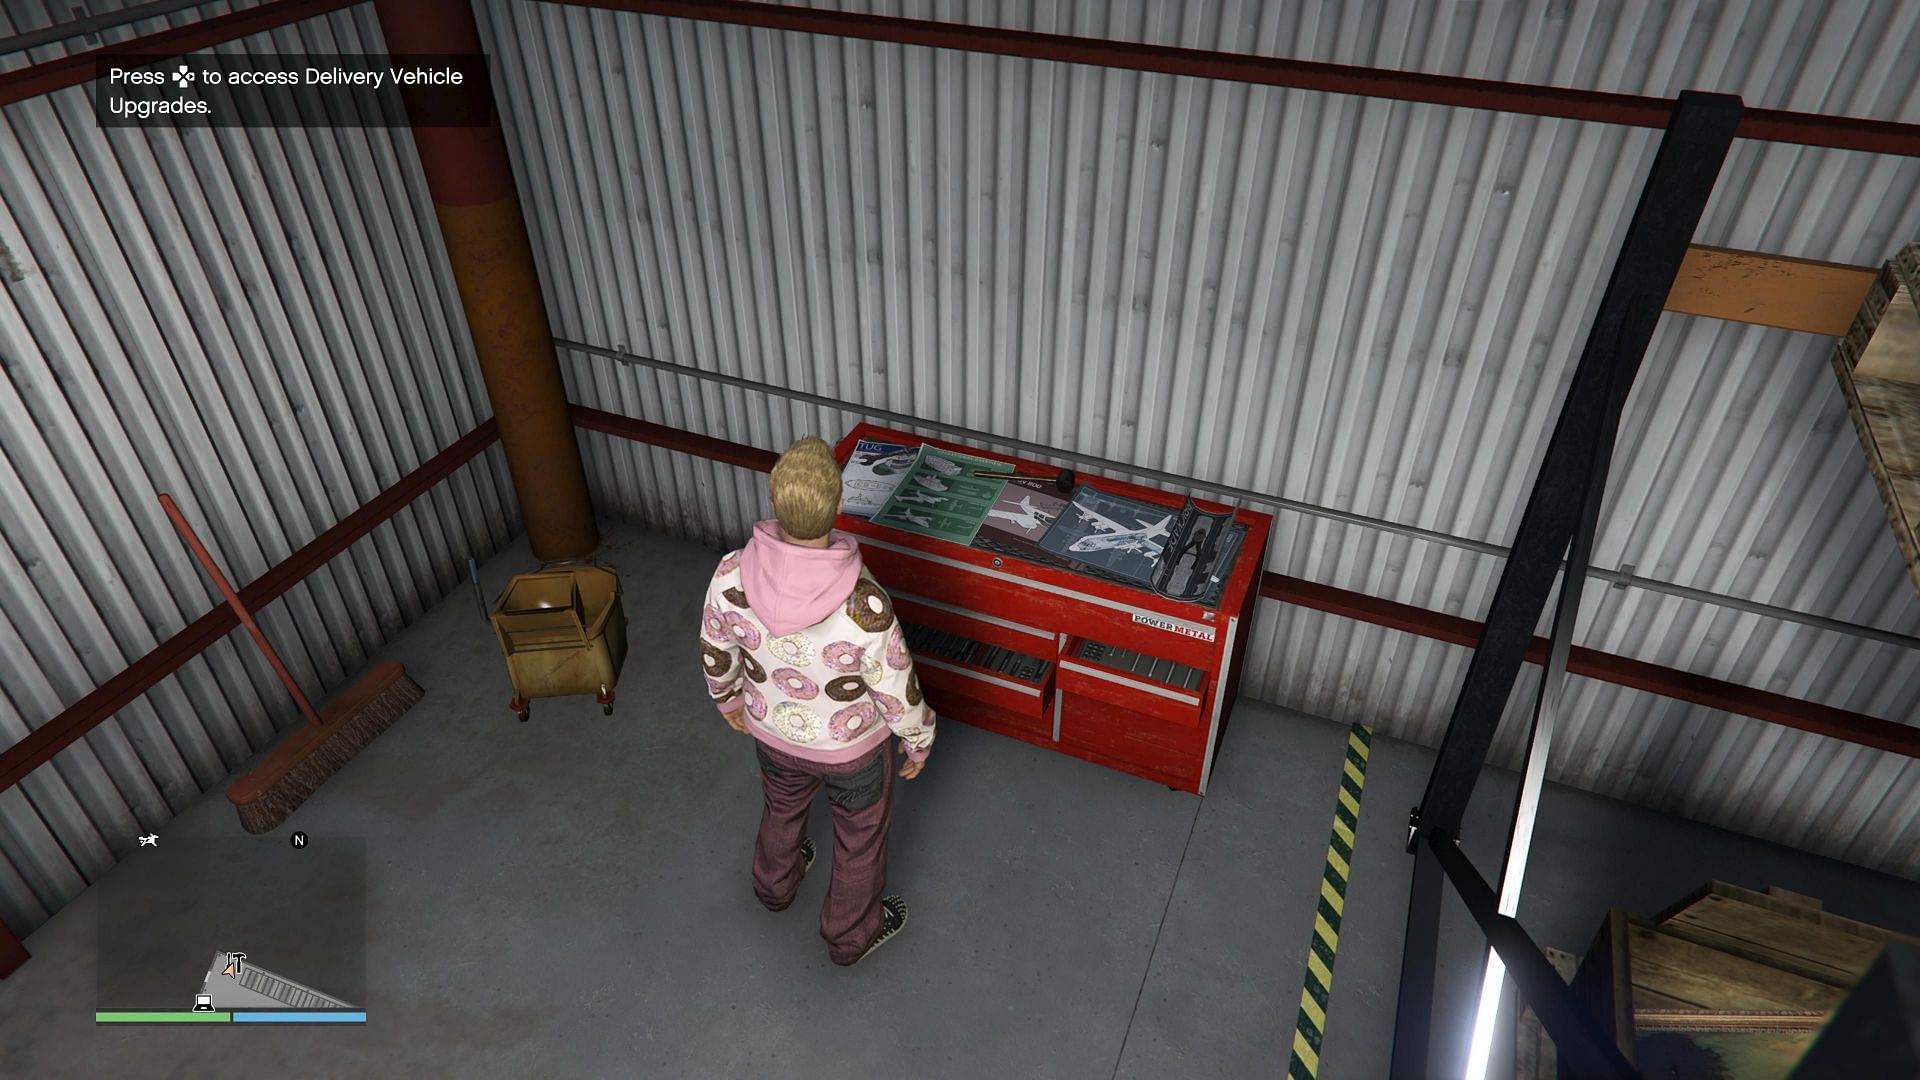 This is where you upgrade delivery vehicles (Image via Rockstar Games)